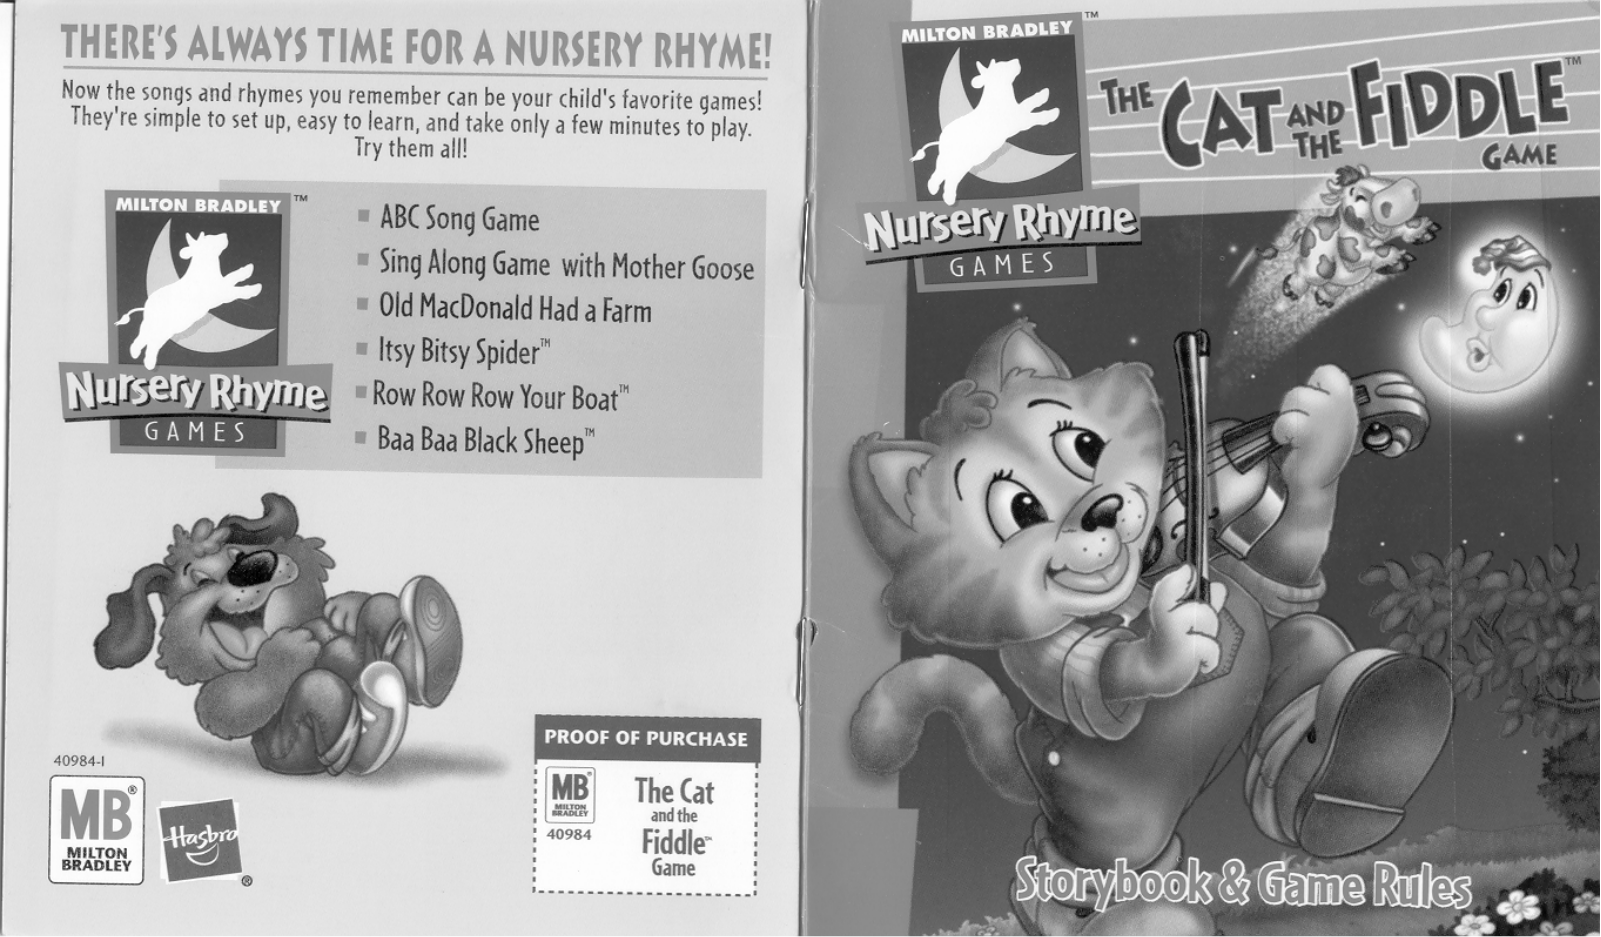 HASBRO Cat and the Fiddle Nursery Rhyme Game User Manual